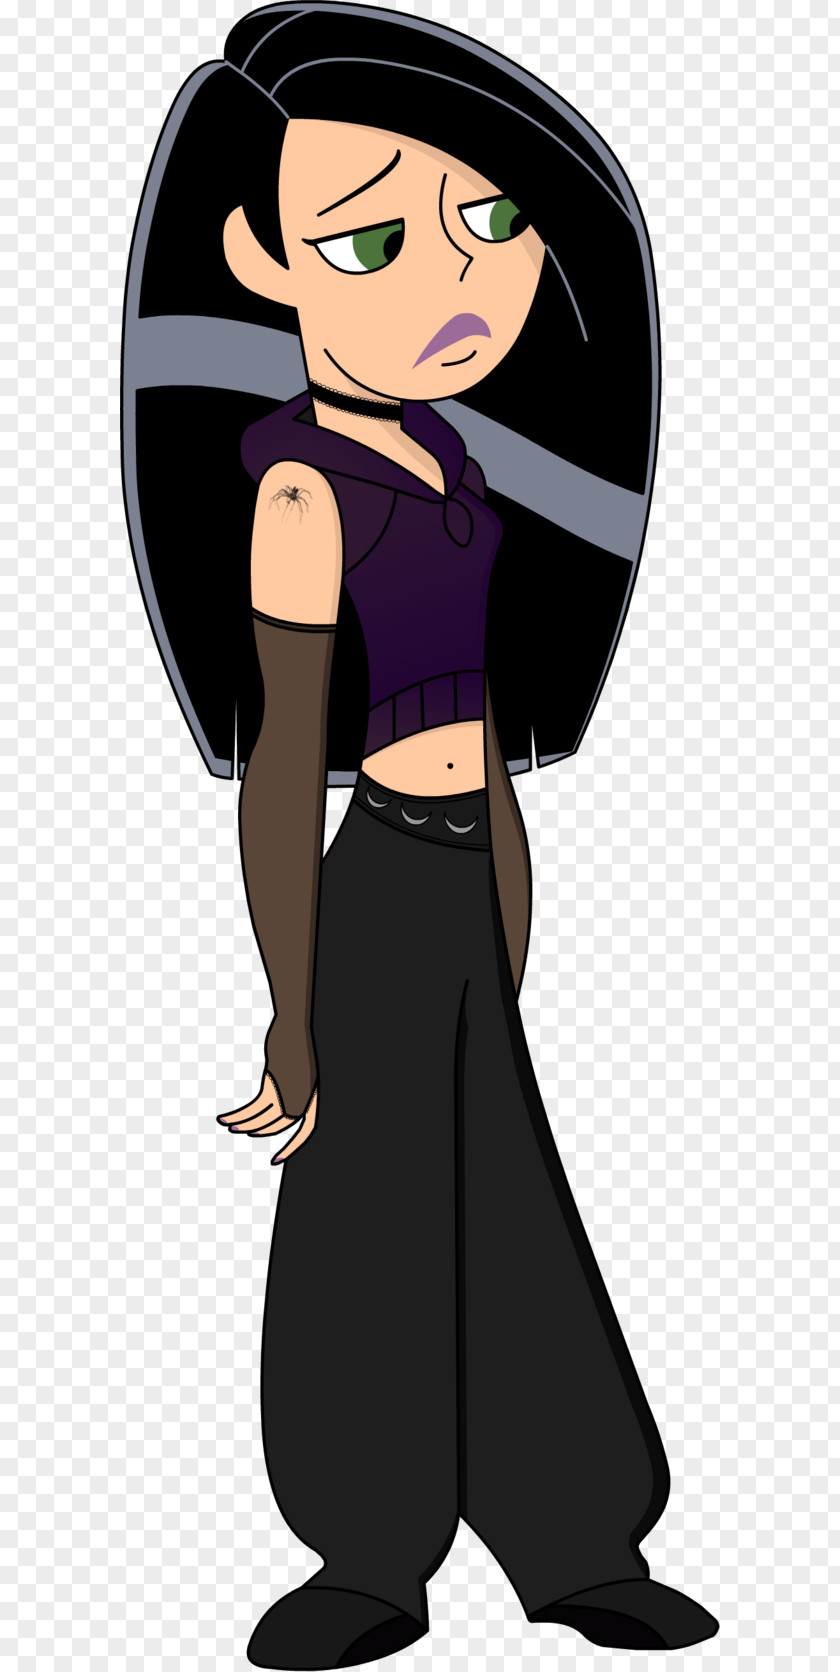 Kim Yuna Possible Ron Stoppable Goth Subculture Black Hair PNG